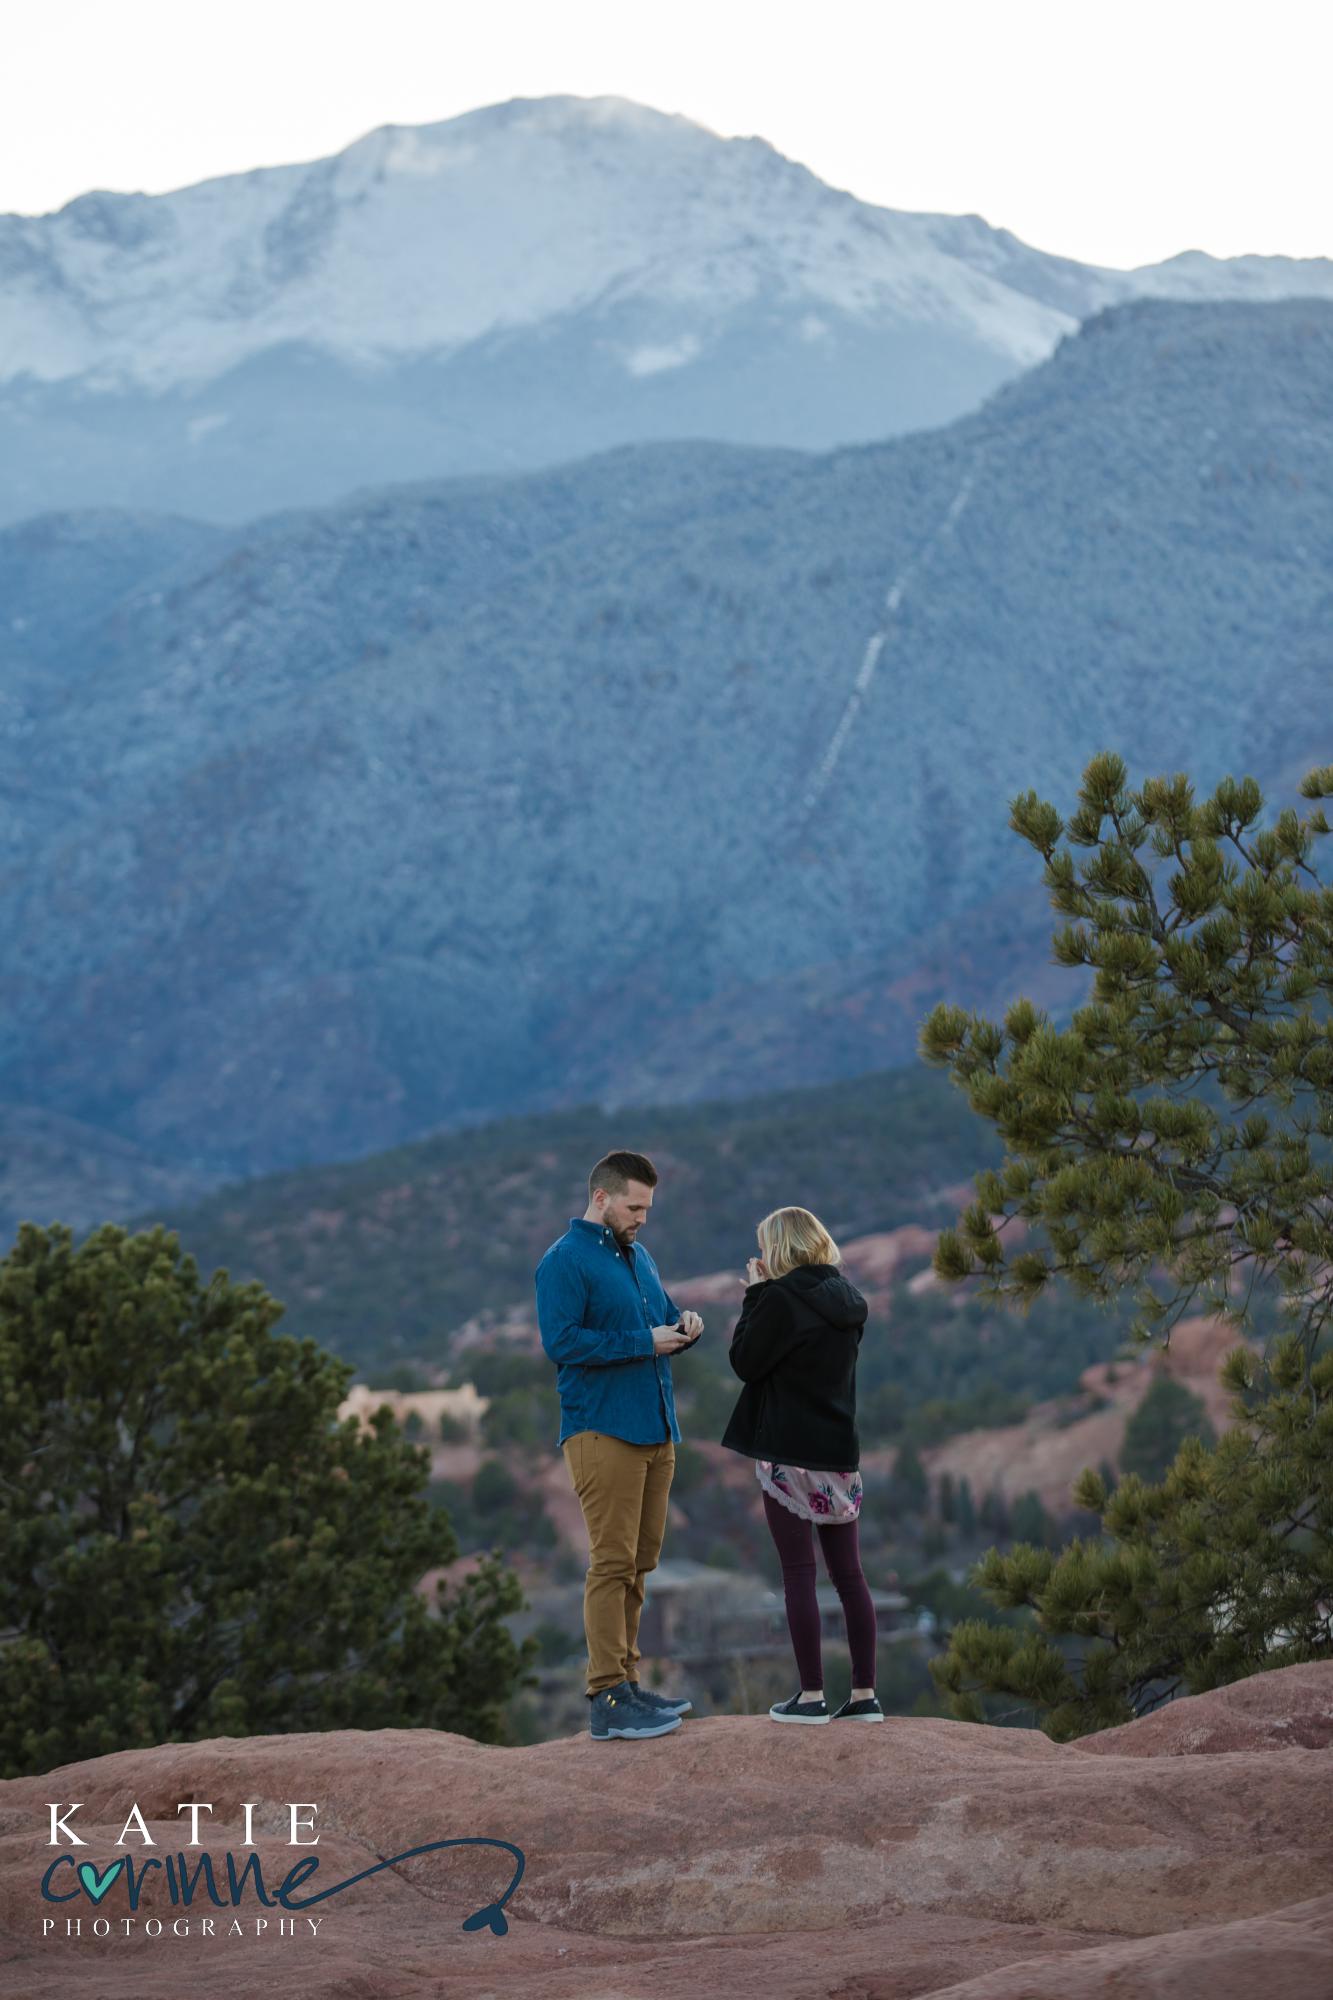 Colorado man proposes to girlfriend in epic engagement